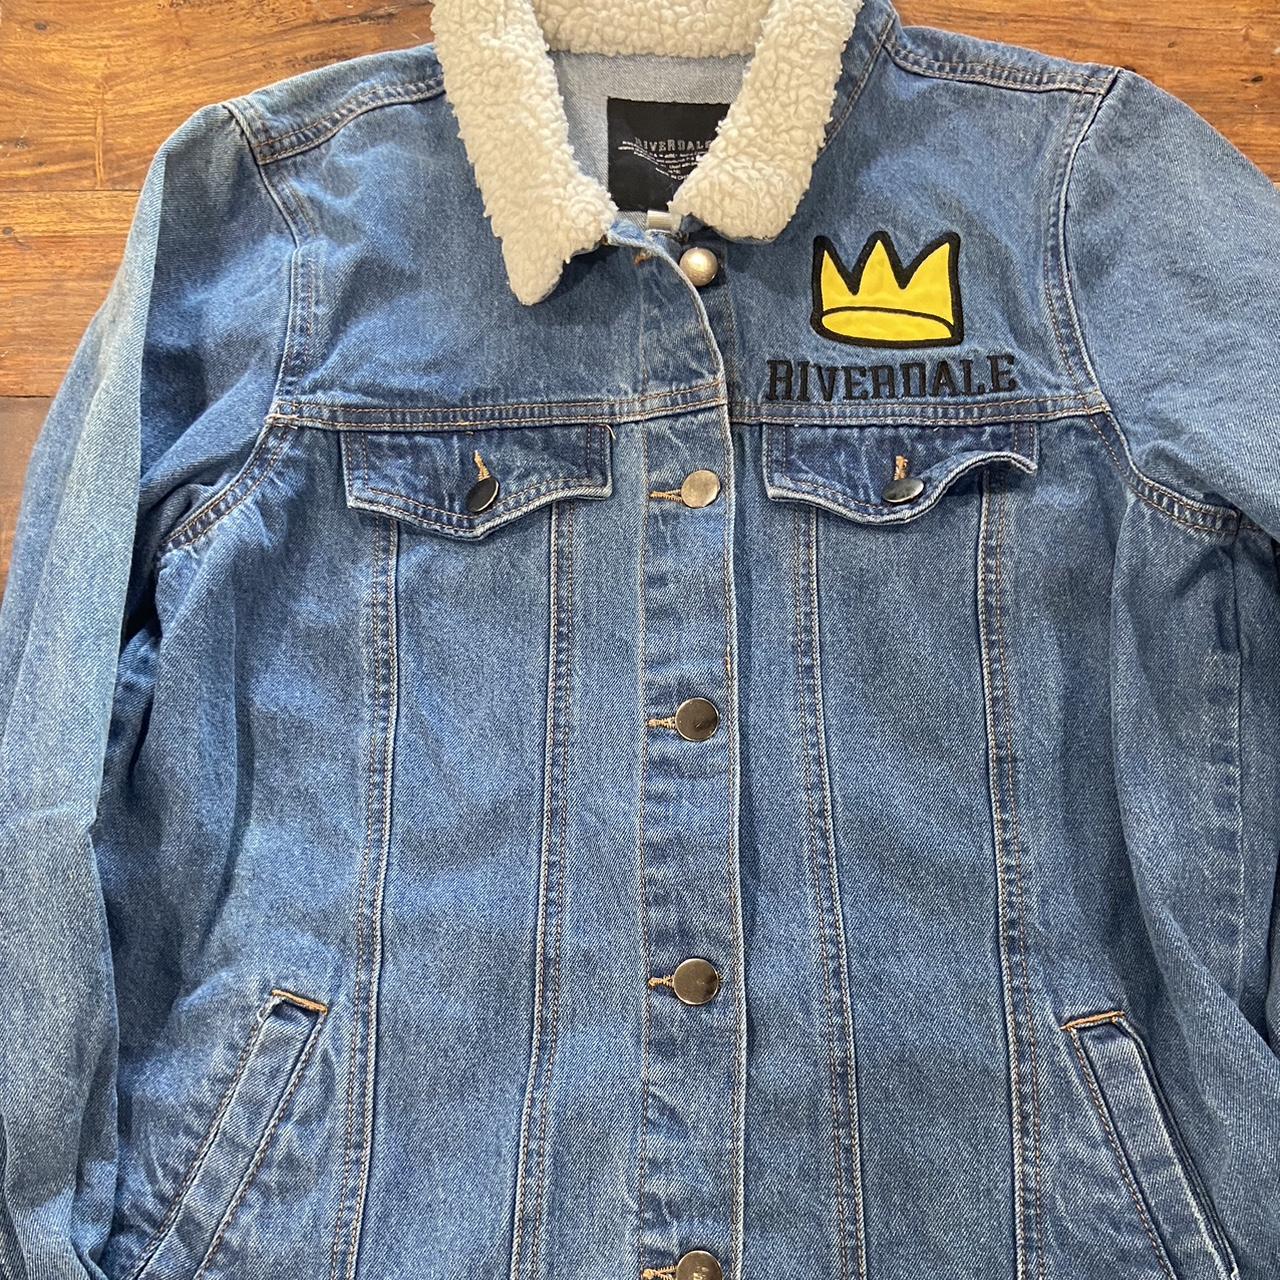 WornOnTV: Jughead's denim jacket with fleece lining on Riverdale | Cole  Sprouse | Clothes and Wardrobe from TV